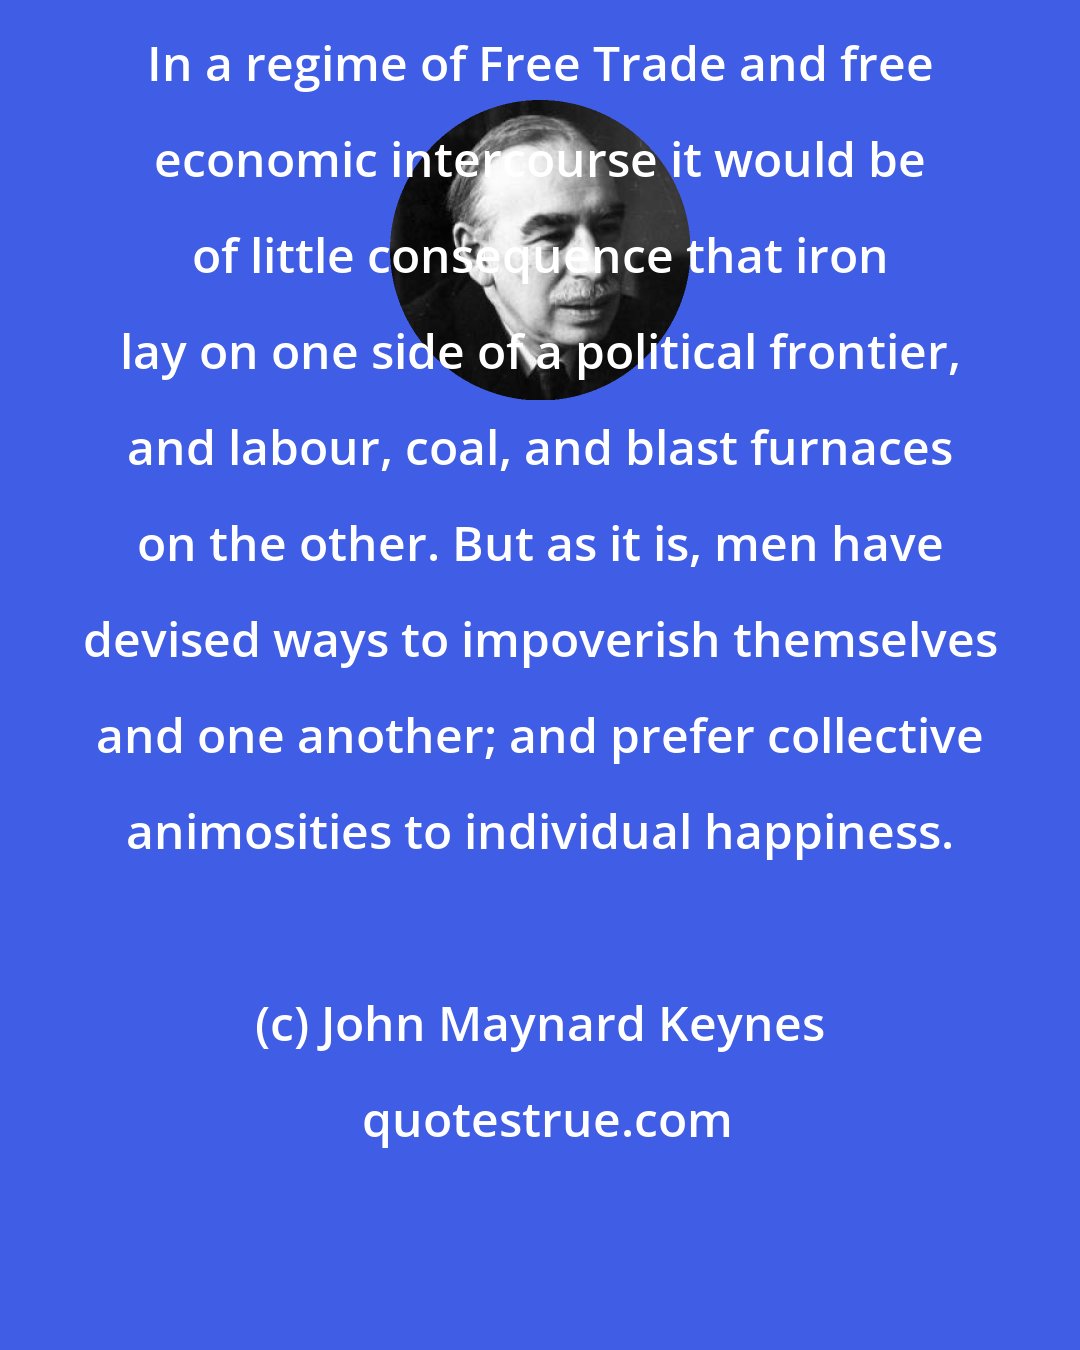 John Maynard Keynes: In a regime of Free Trade and free economic intercourse it would be of little consequence that iron lay on one side of a political frontier, and labour, coal, and blast furnaces on the other. But as it is, men have devised ways to impoverish themselves and one another; and prefer collective animosities to individual happiness.